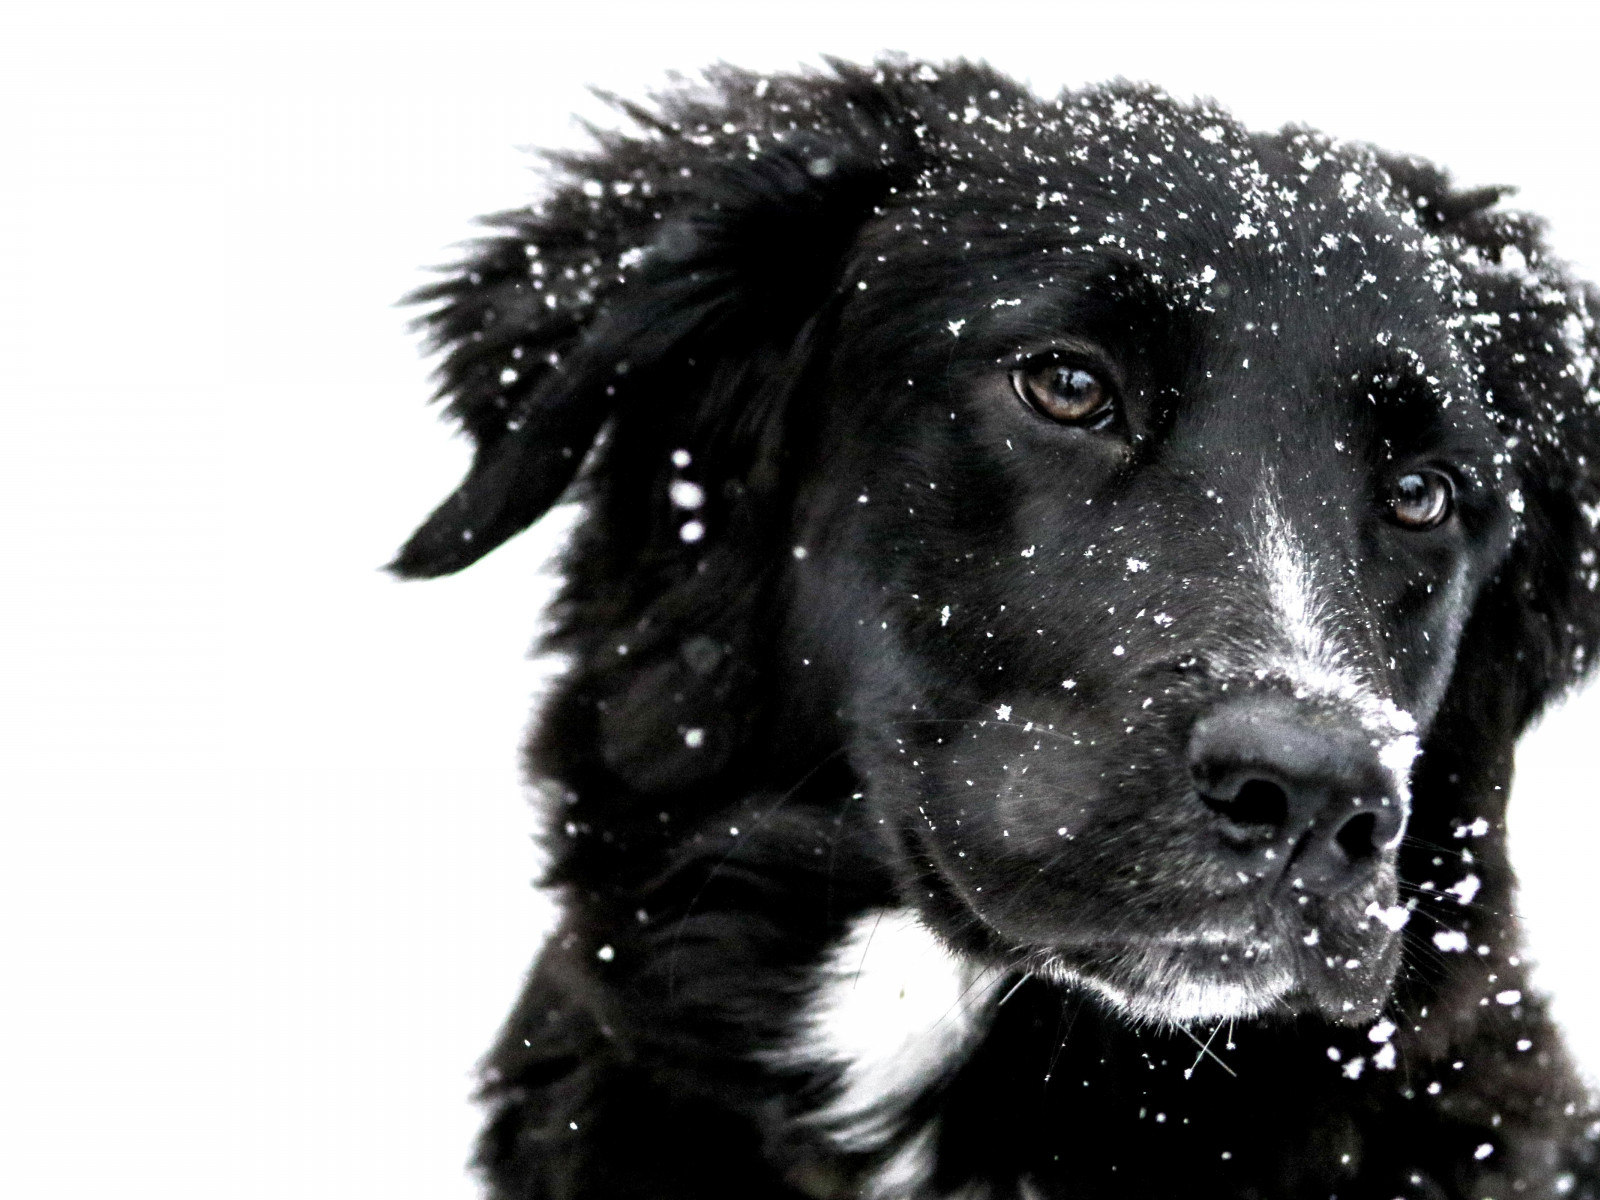 Snowing over the cute dog wallpaper 1600x1200